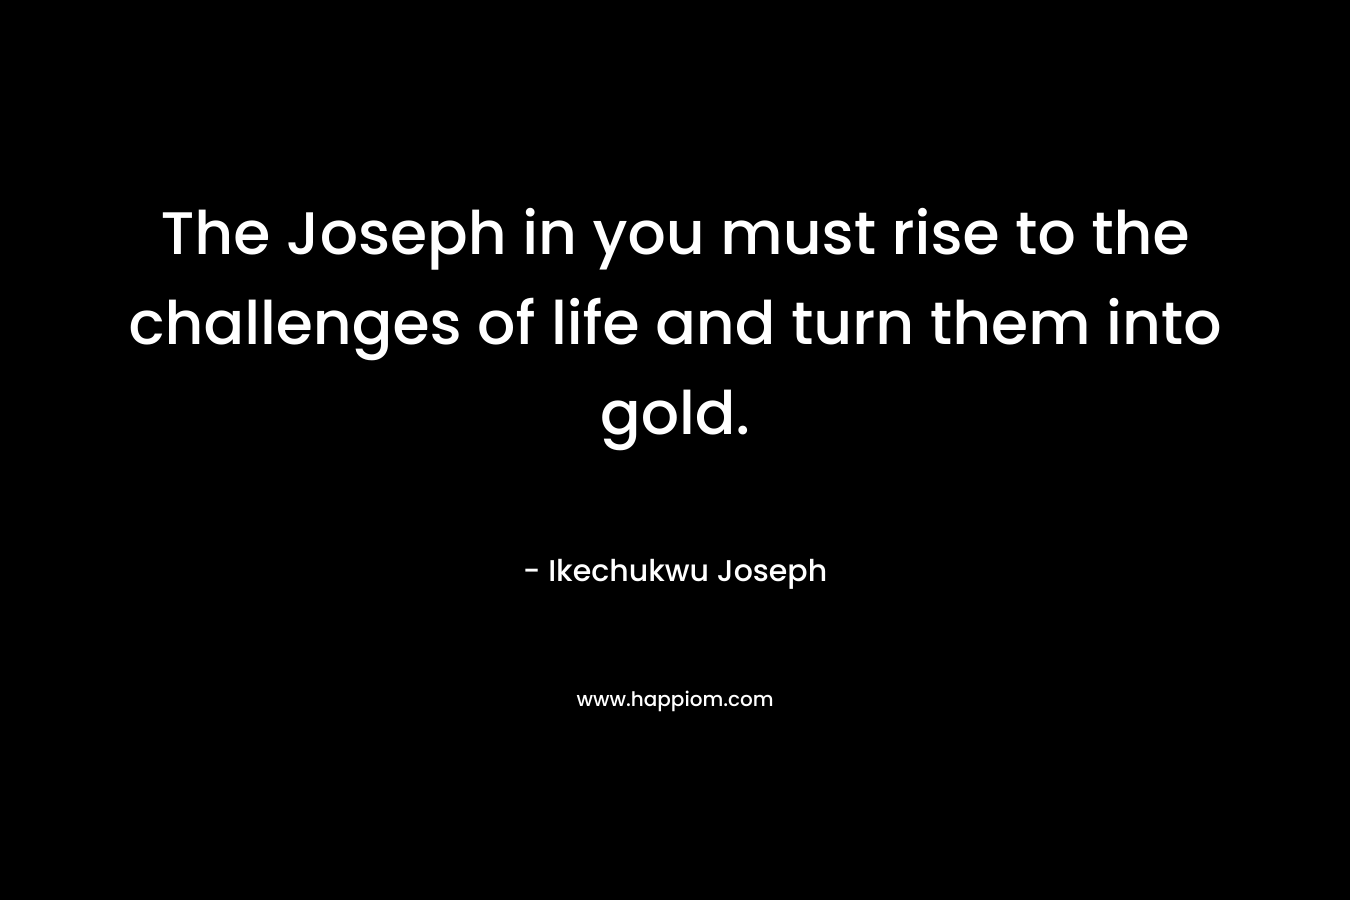 The Joseph in you must rise to the challenges of life and turn them into gold. – Ikechukwu Joseph